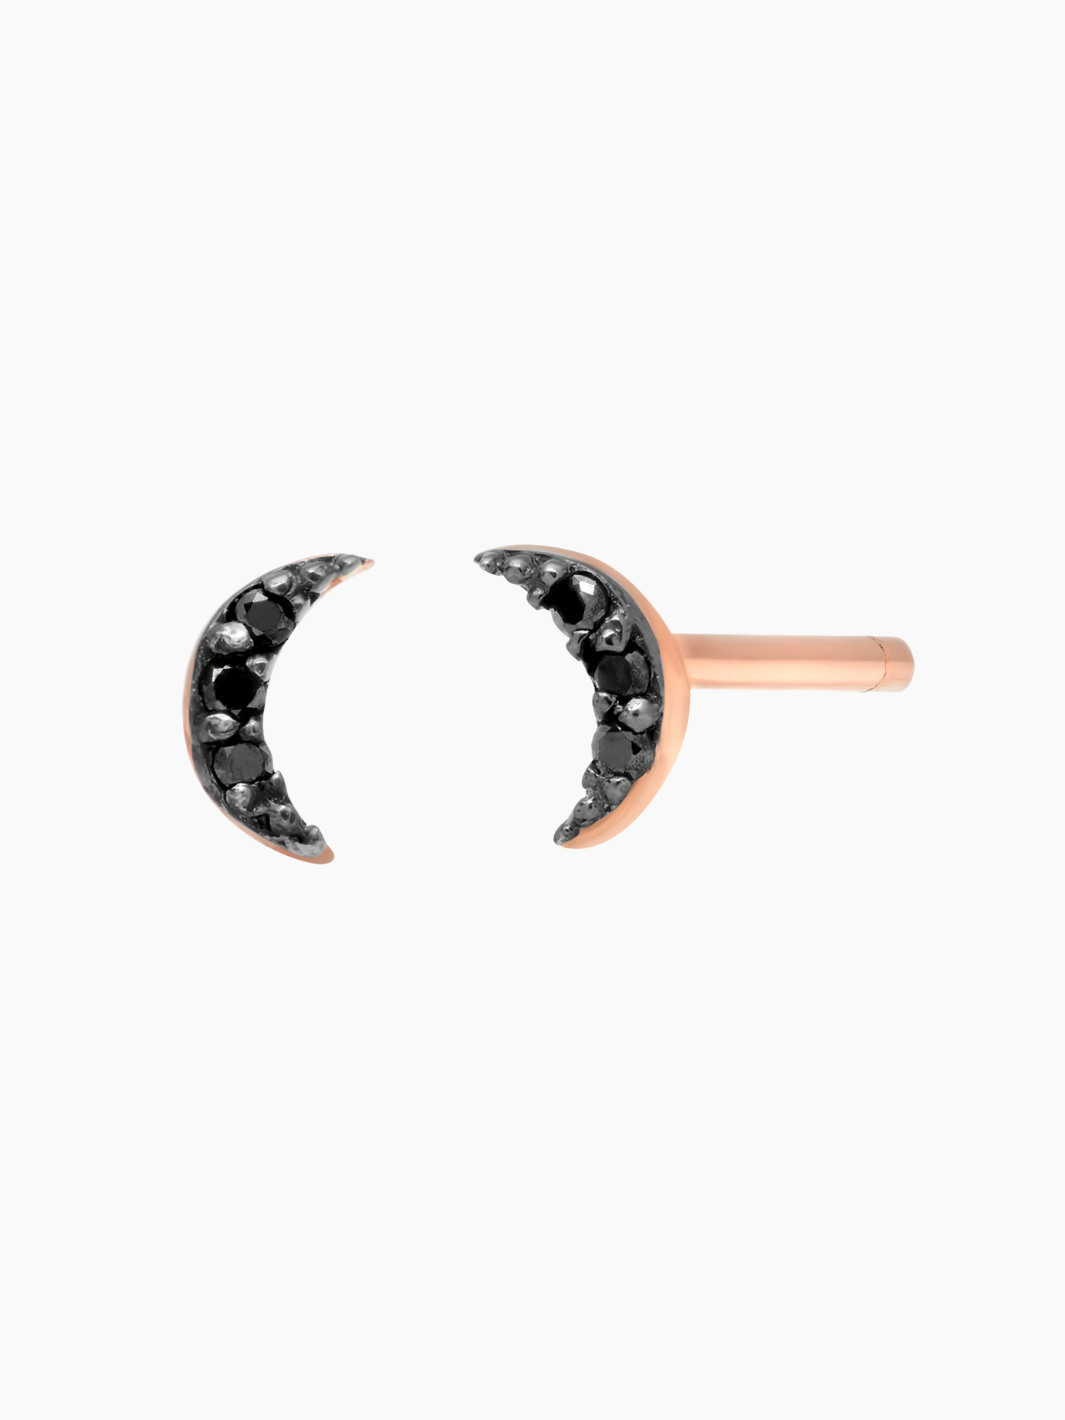 14K ROSE GOLD MOON STUD EARRINGS WITH BLACK DIAMONDS - Romi Boutique